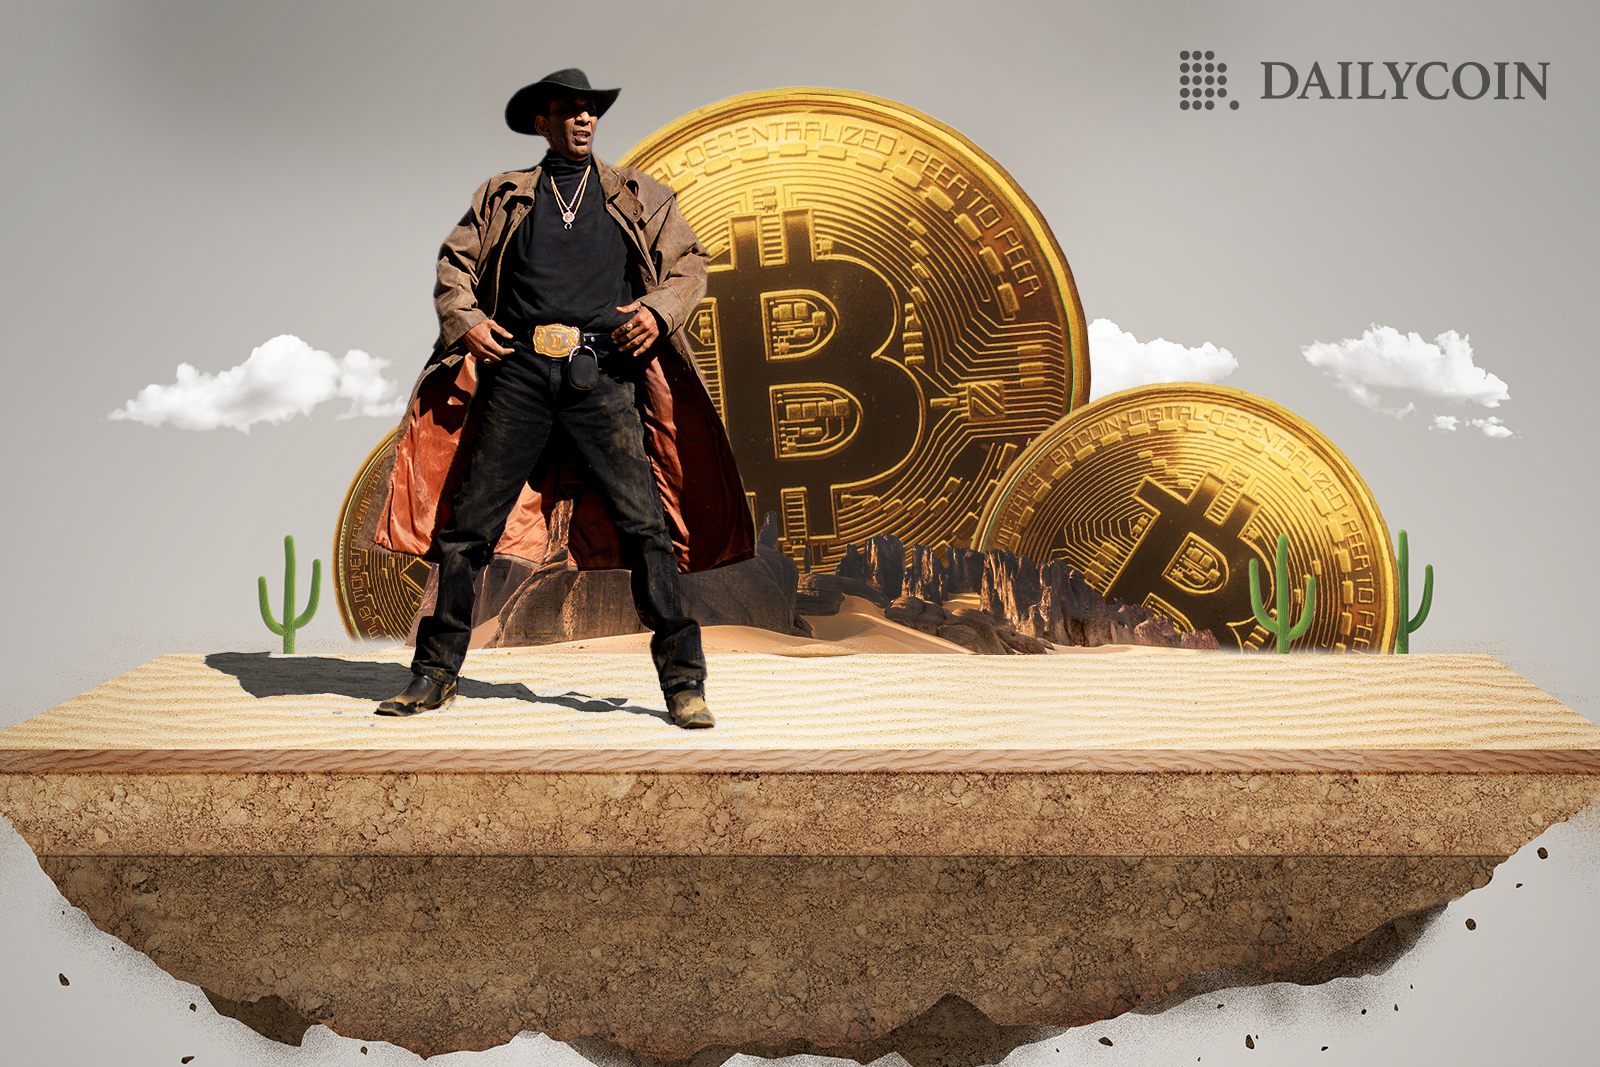 Cowboy standing in front of giant Bitcoin sign in the middle of the desert.